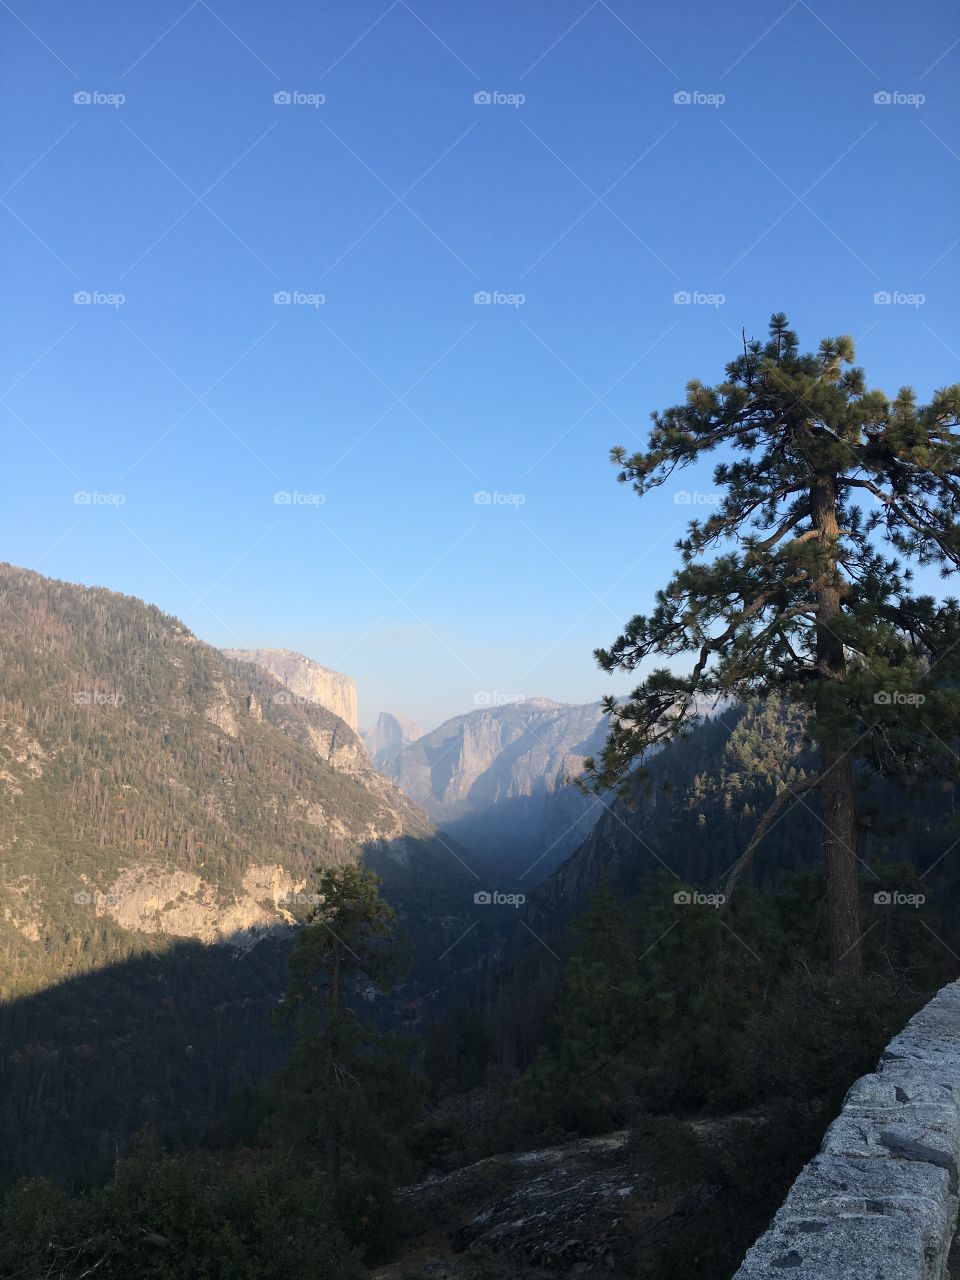 A view of Yosemite valley with a lone pine tree overlooking just the edge of El Capitan Mountain. The depths of the valley are slightly hazy and the sky is clear and blue. 